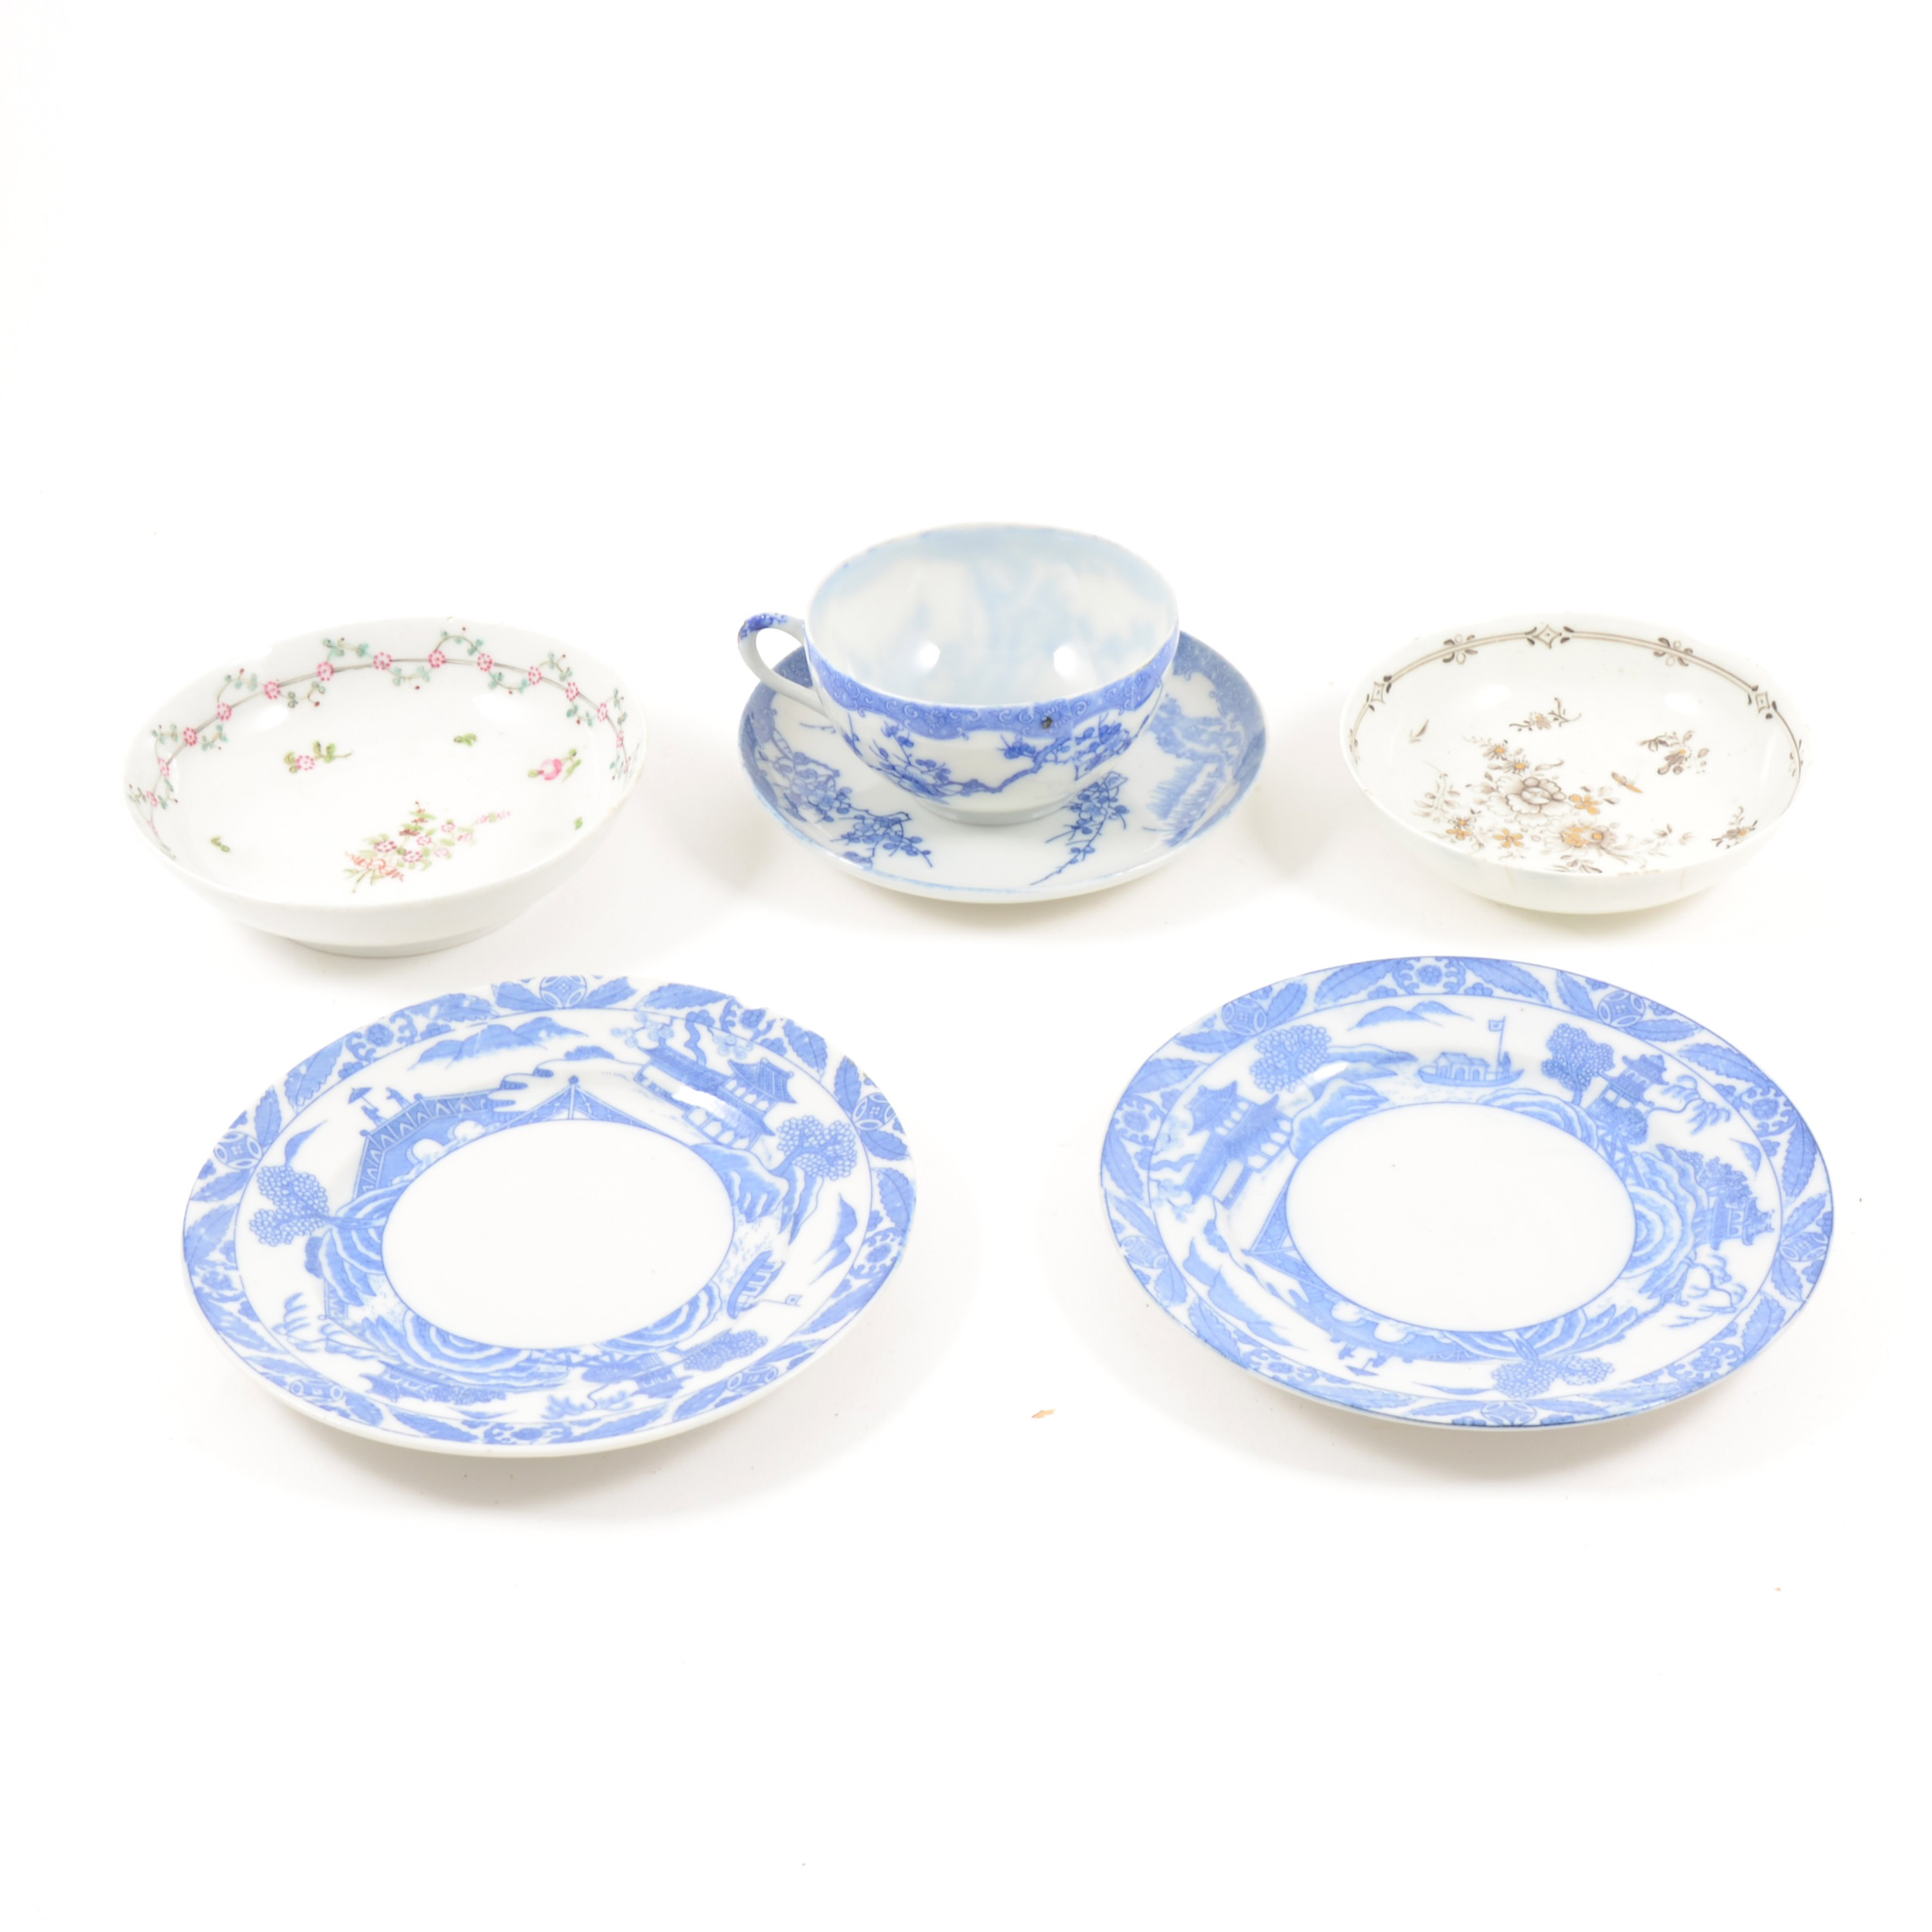 A late Chinese blue and white cup and saucer, and a collection of English porcelain saucers